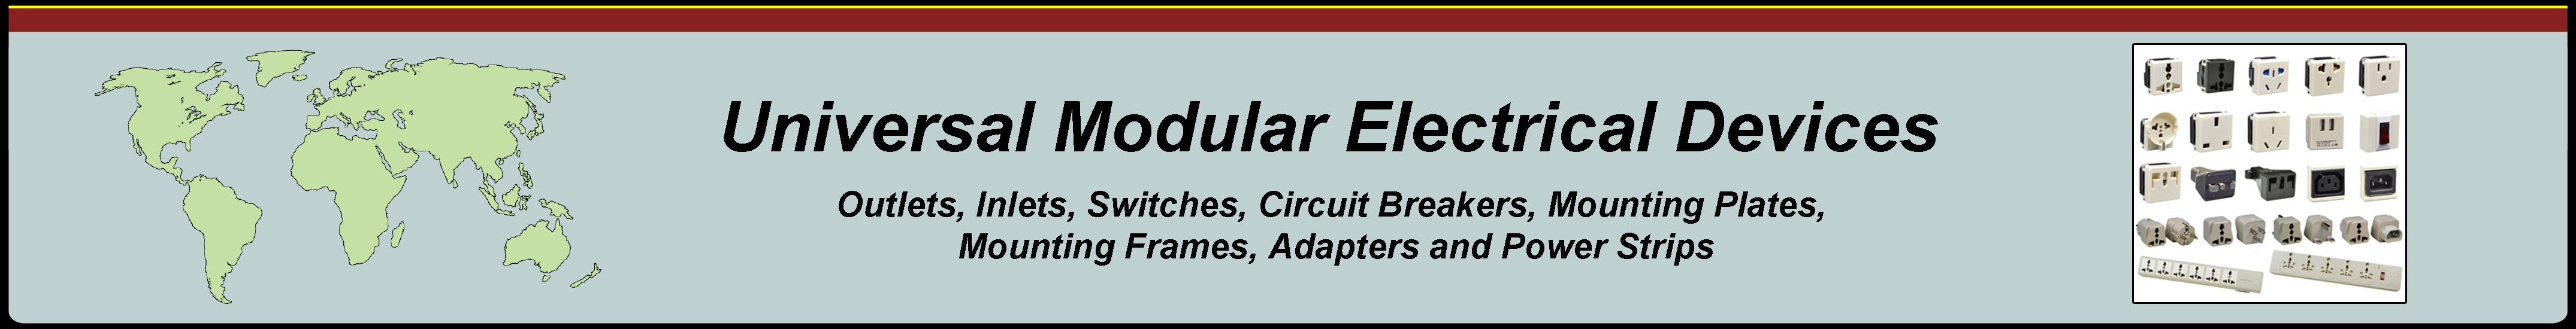 Universal Modular Electrical Devices